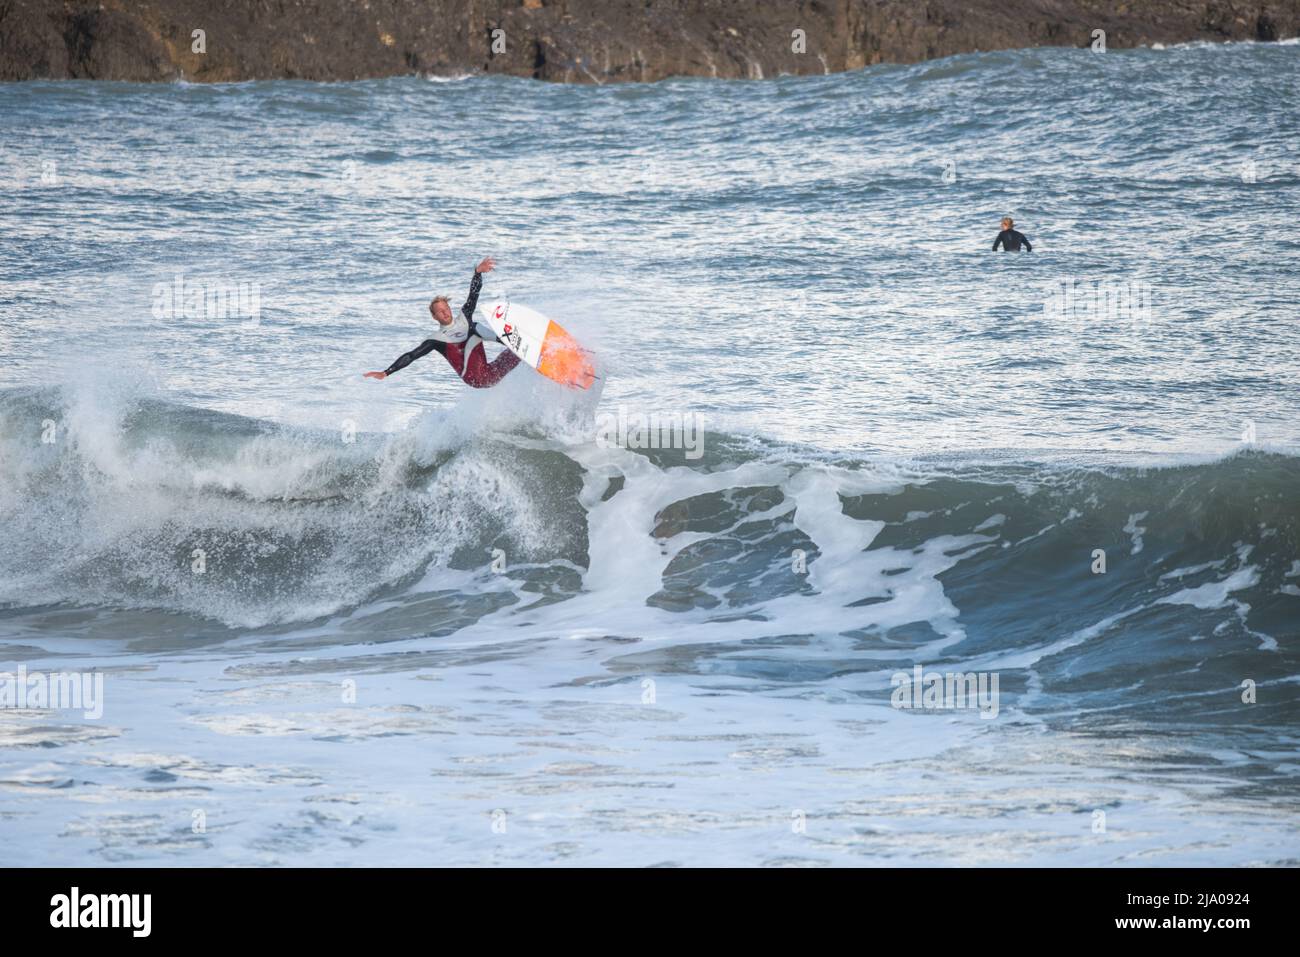 Alex Moriis, surfer on wave at Broad Haven South, Pembrokeshire, Wales, UK Stock Photo